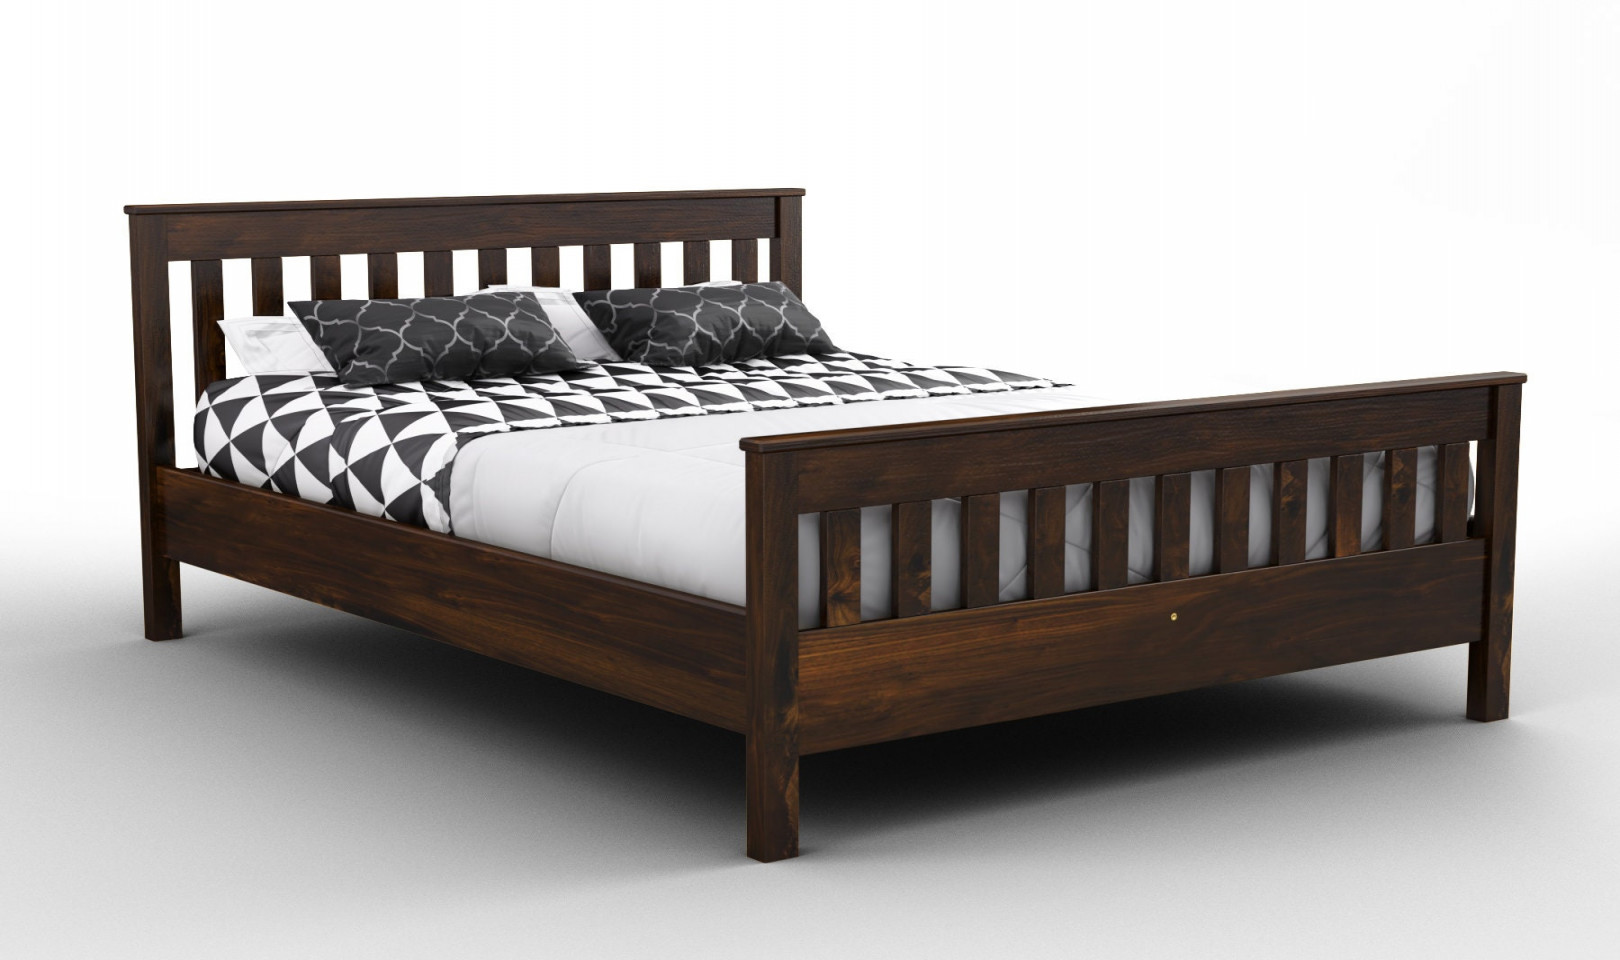 Nodax Wooden Solid Pine King Size Bed Frame Model - Etsy